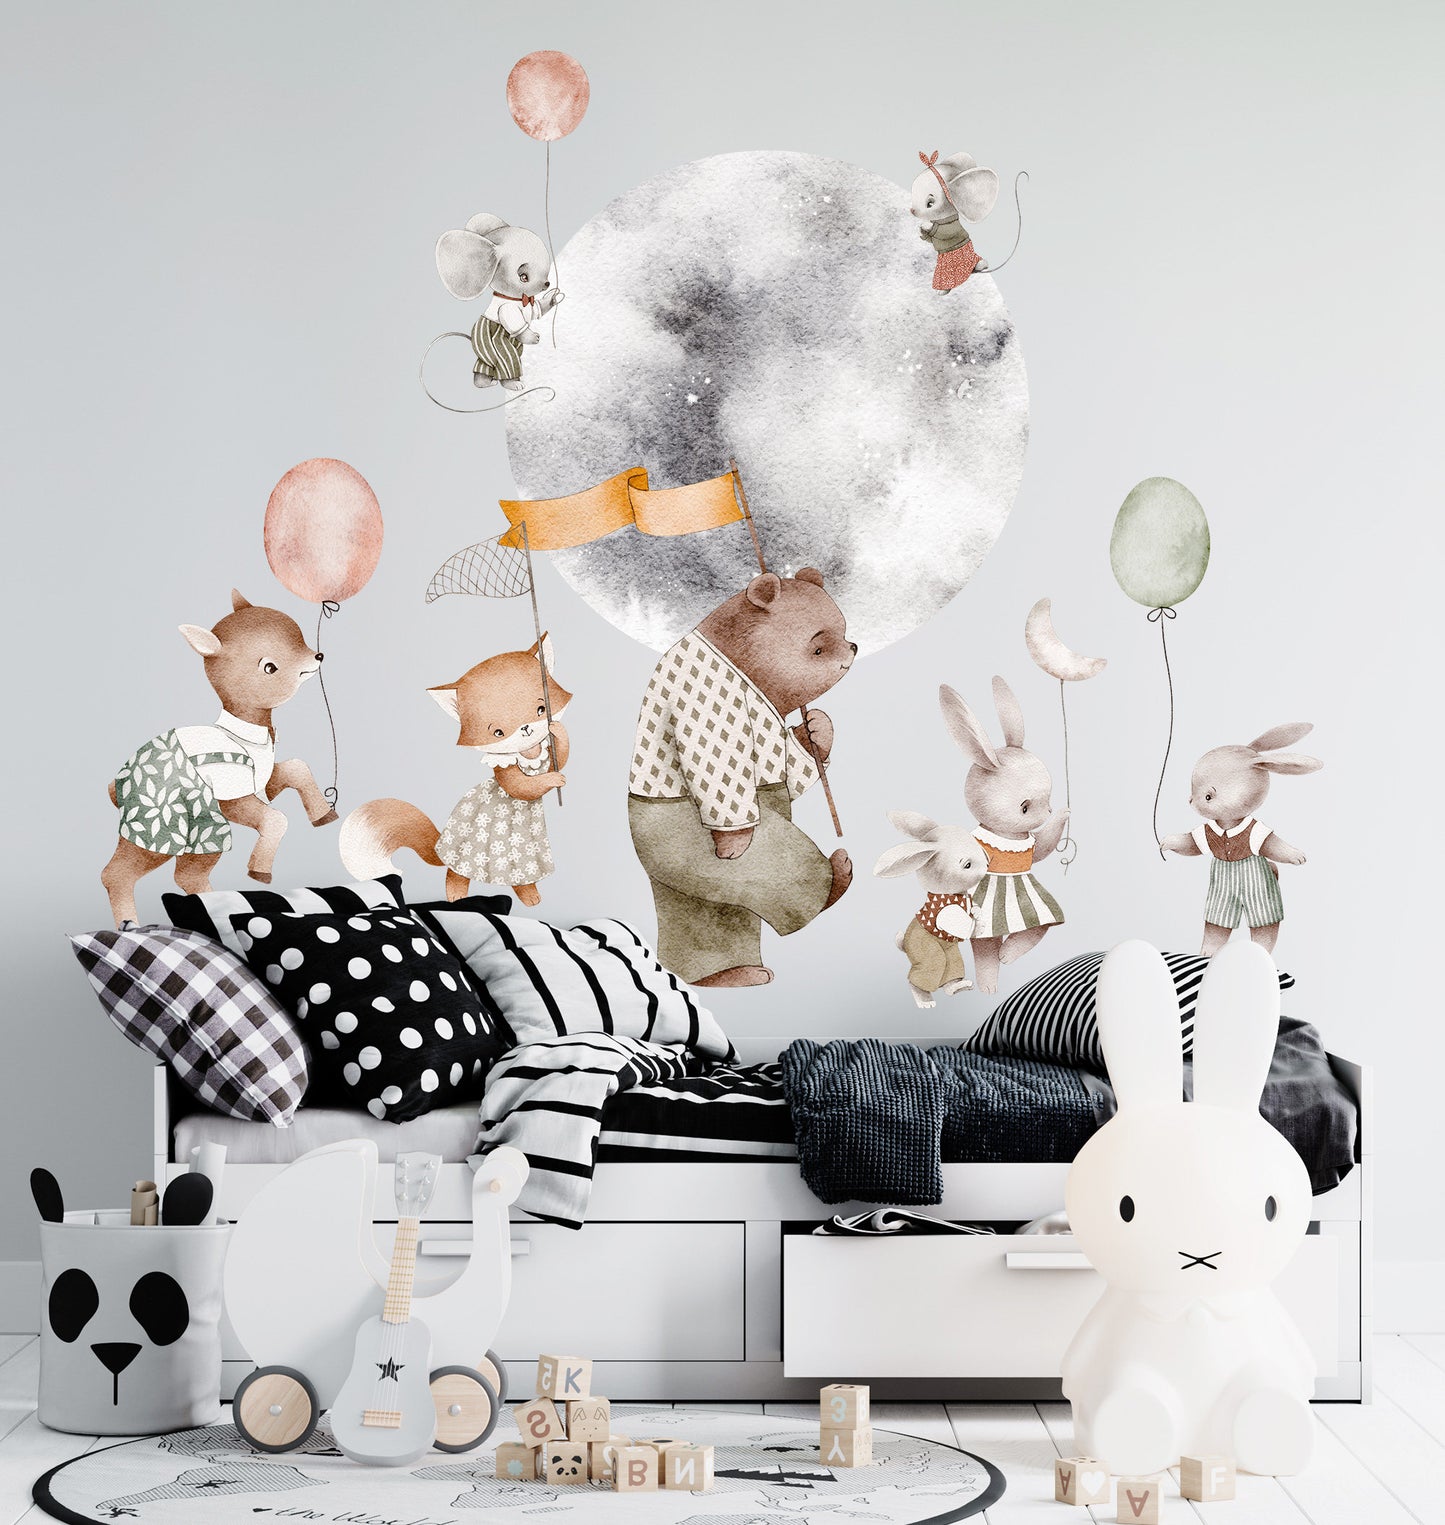 Adorable Animal Babies Strolling Under Full Moon with Balloons and Flags Removable Wall Decal - BR230